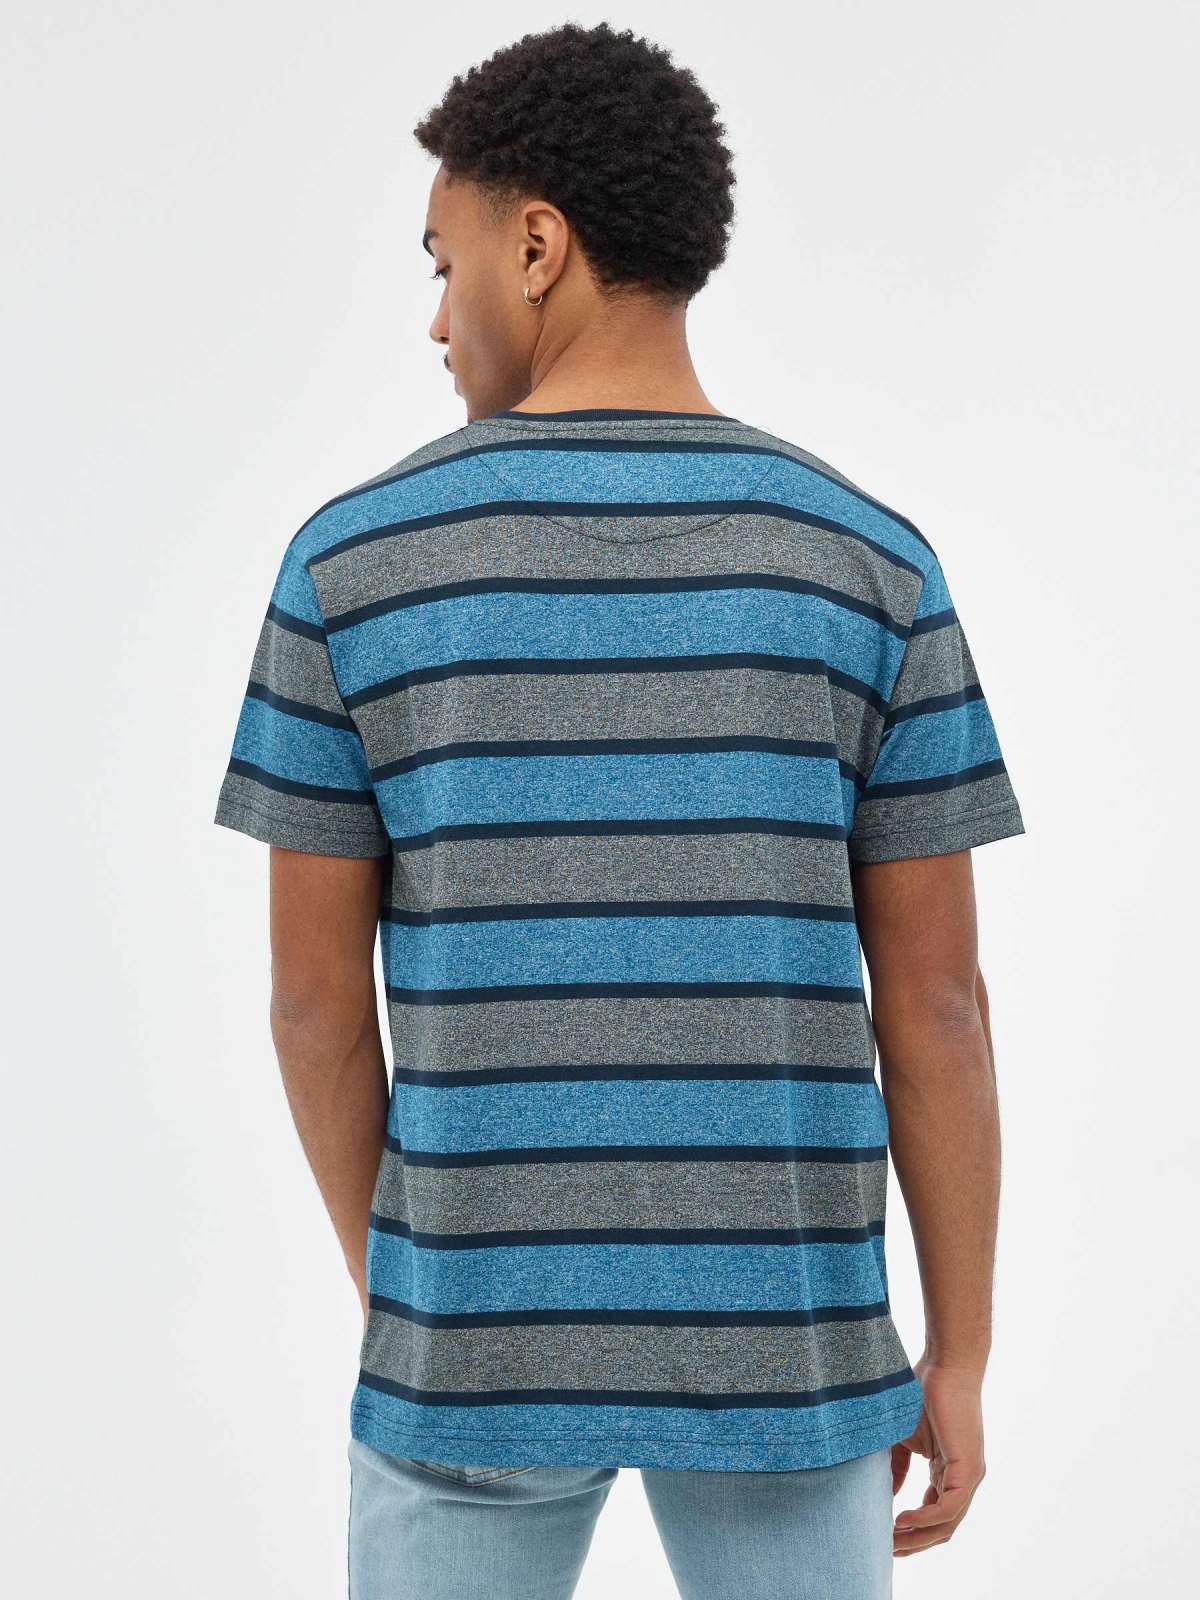 Striped T-shirt with pocket navy middle back view